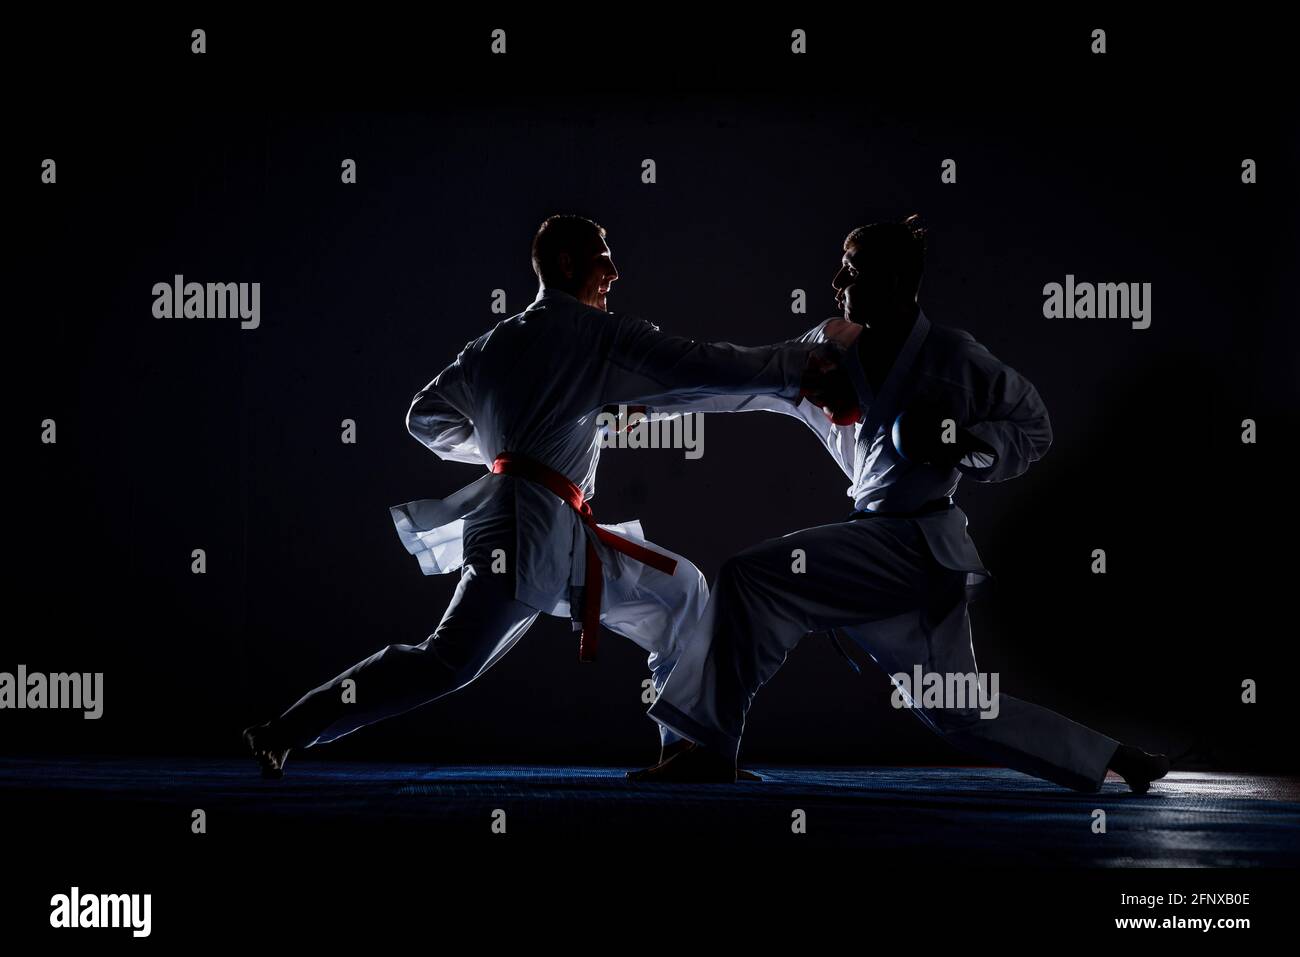 Karate martial arts. Fighters training karate moves against dark background  Stock Photo - Alamy